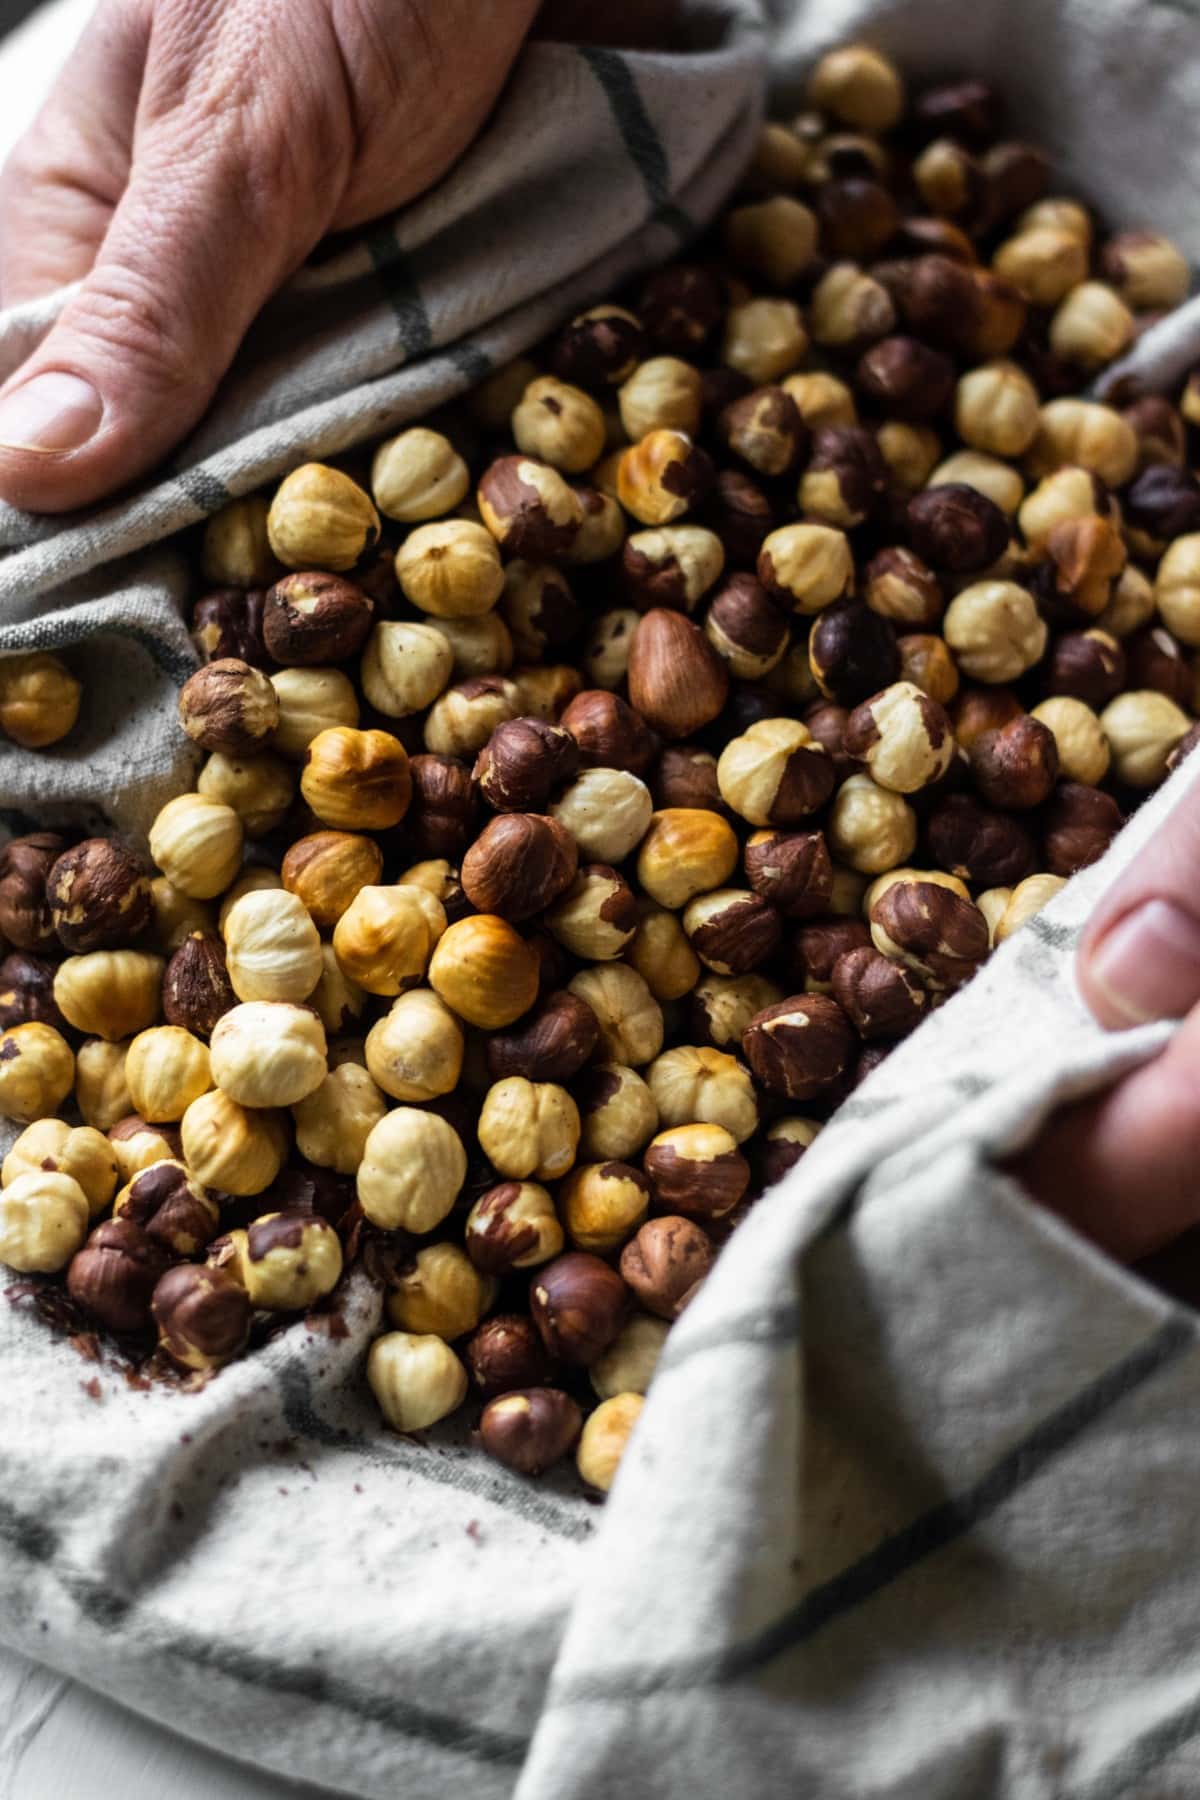 The roasted hazelnuts being rubbed in a tea towel to remove the skins.